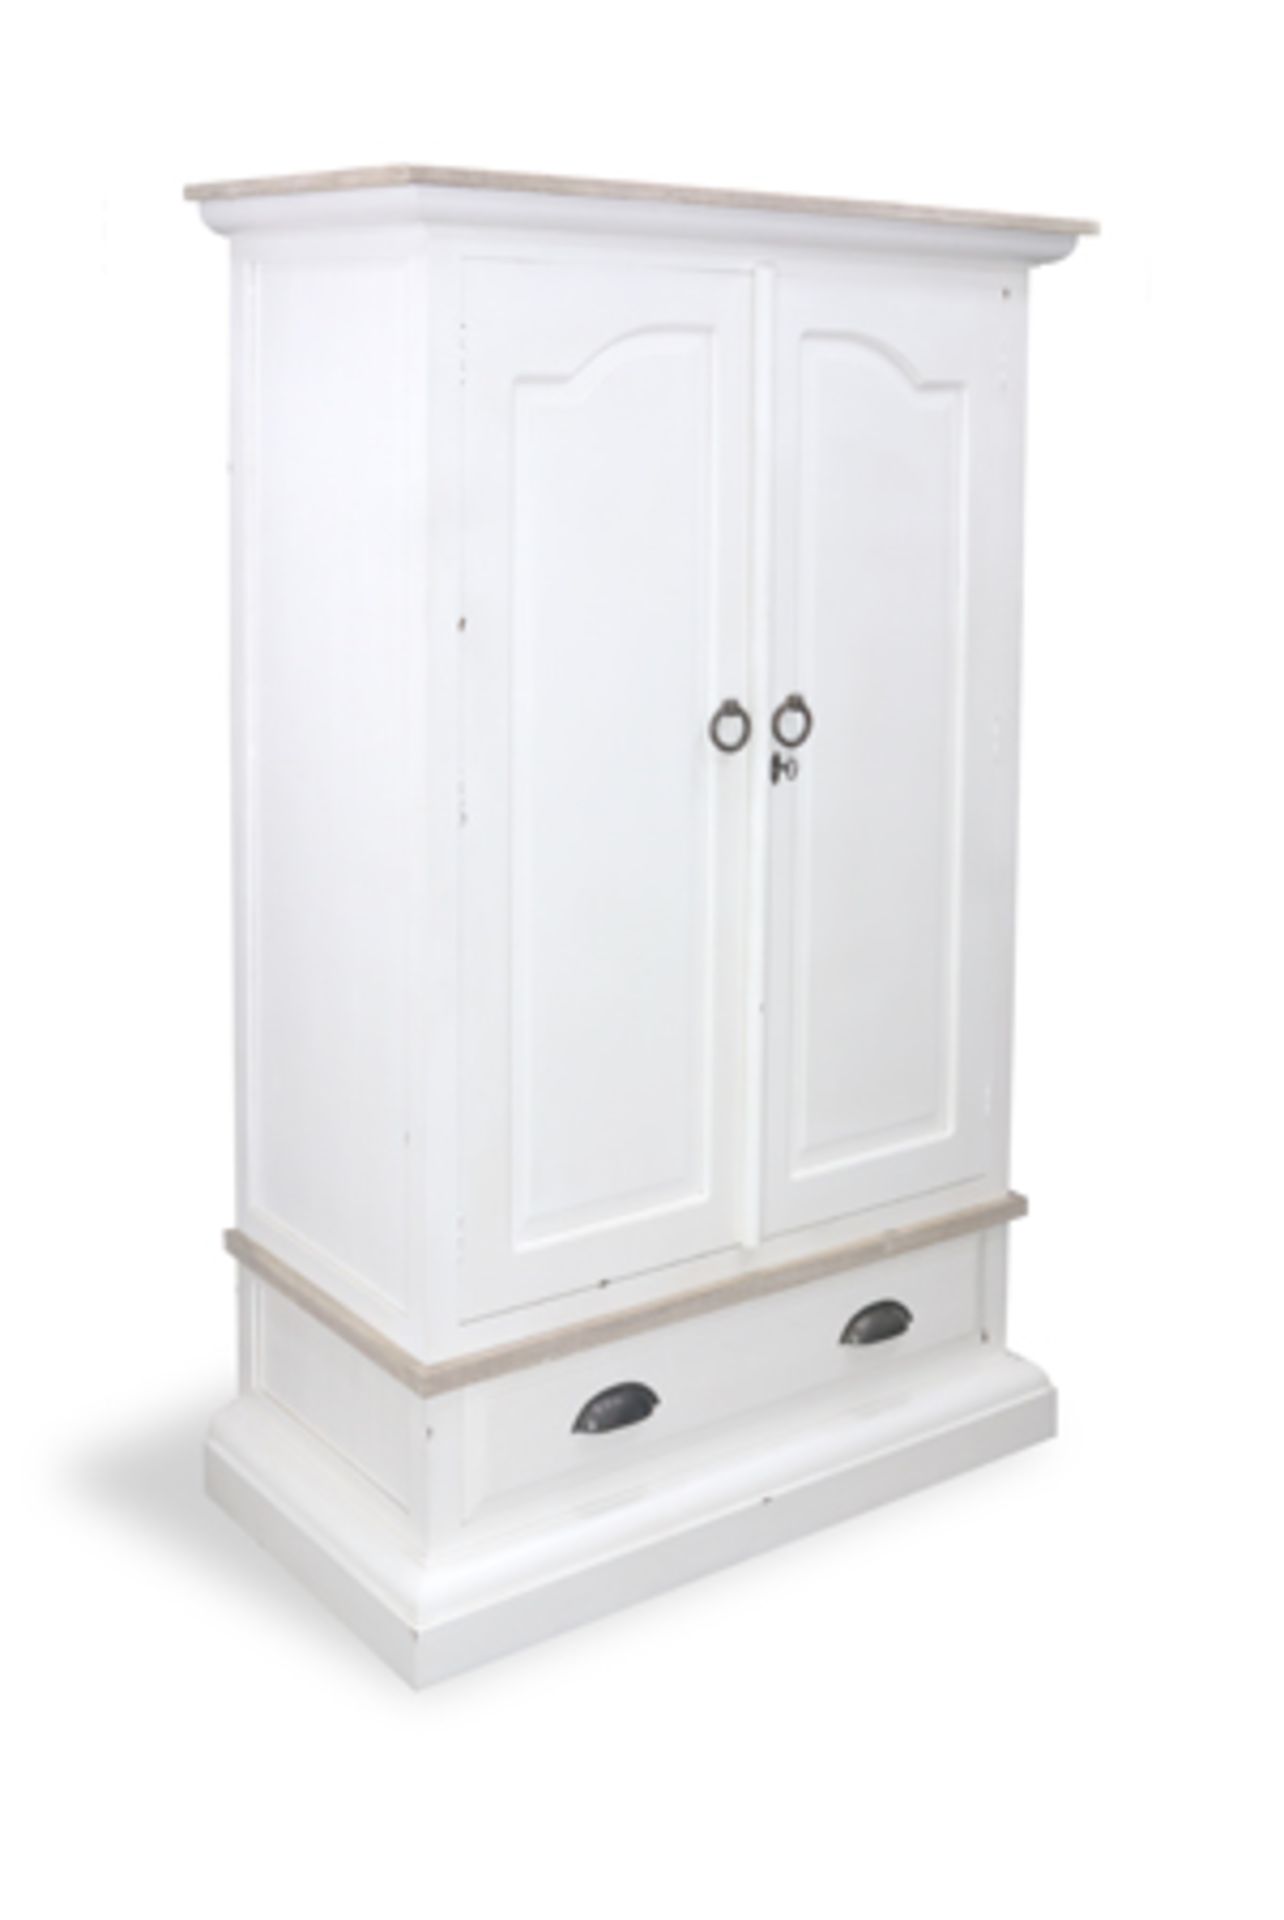 Cottonwood Wardrobe 2 Door Antique White The Cottonwood Finish Adds A Fresh And Tranquil Appeal To - Image 2 of 4